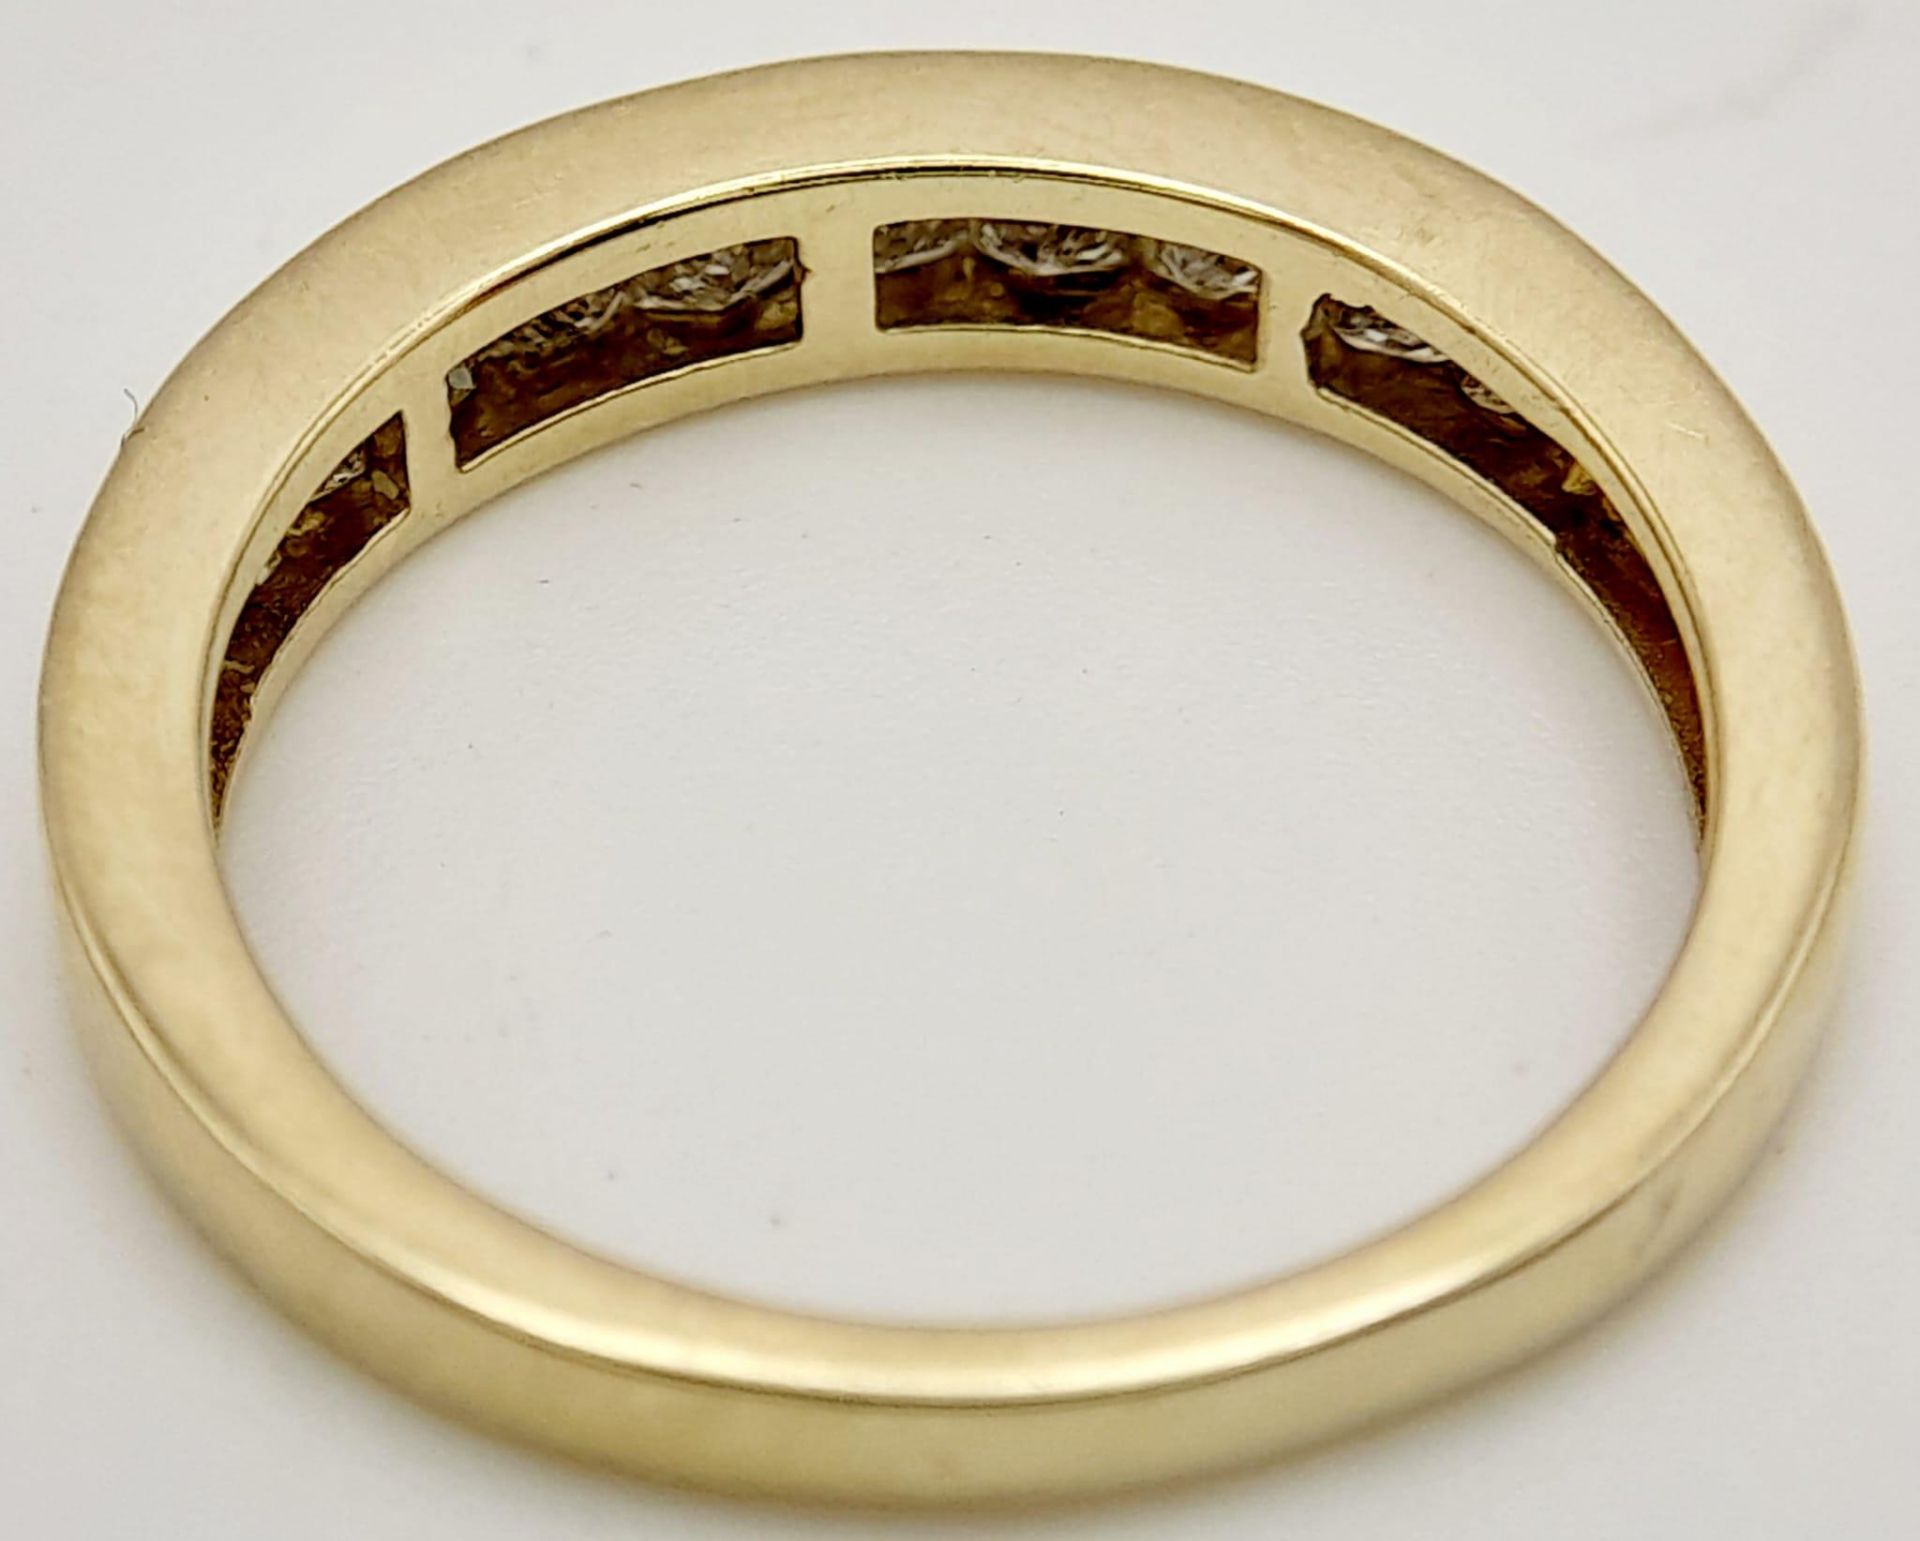 A 9K Yellow Gold Diamond Set Half Eternity Ring. 0.40ctw, Size N, 2.5g total weight. Ref: 8419 - Image 5 of 7